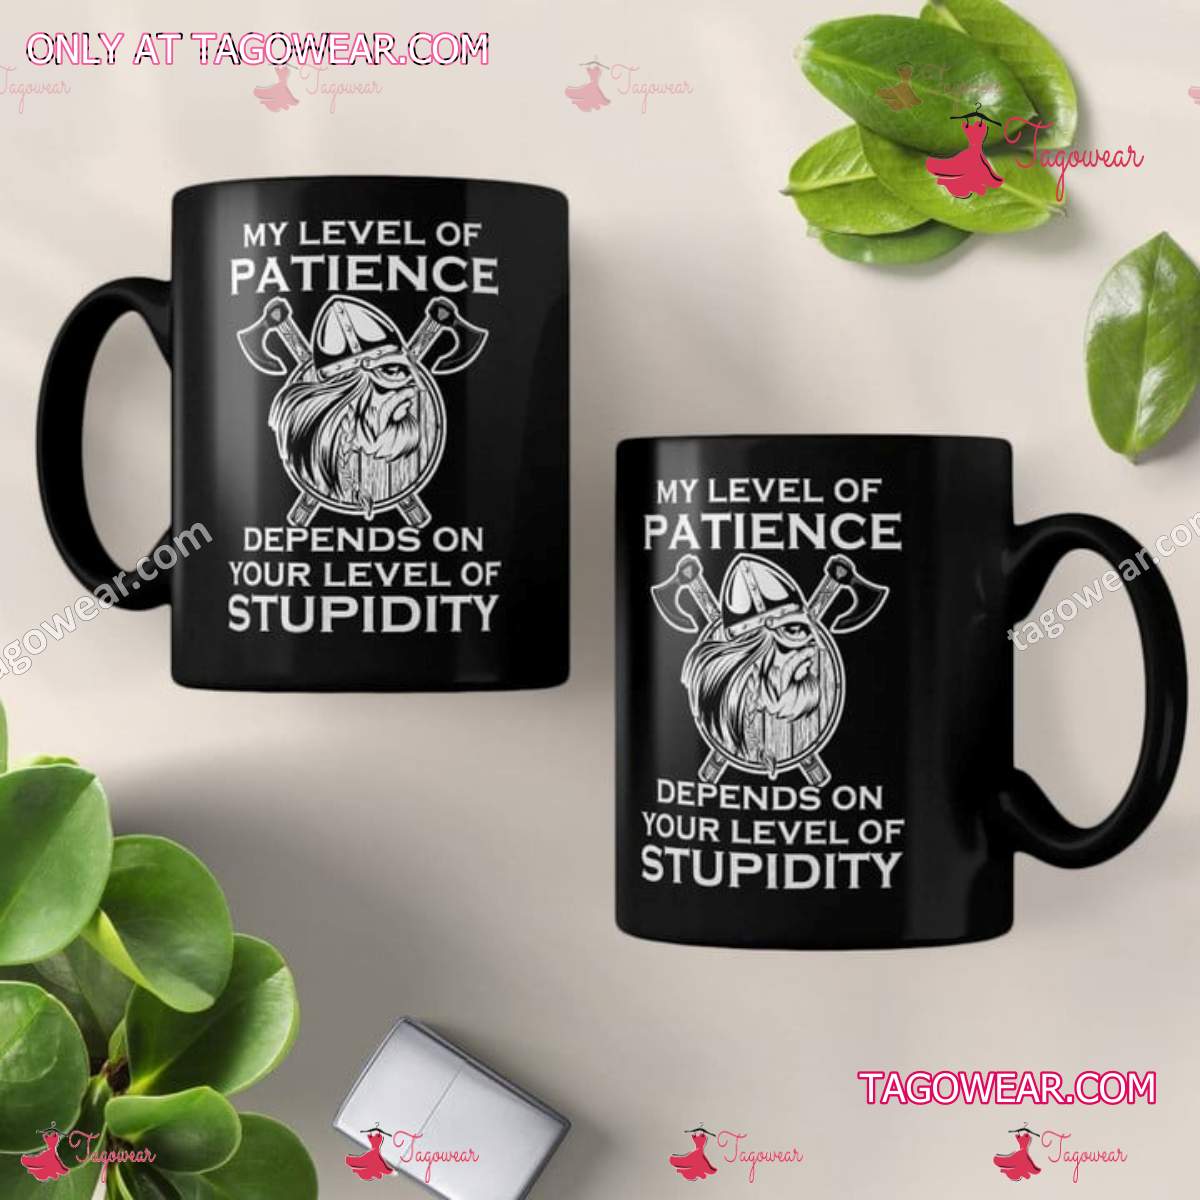 https://images.tagowear.com/2023/10/Viking-My-Level-Of-Patience-Depends-On-Your-Level-Of-Stupidity-Mug-a.jpg